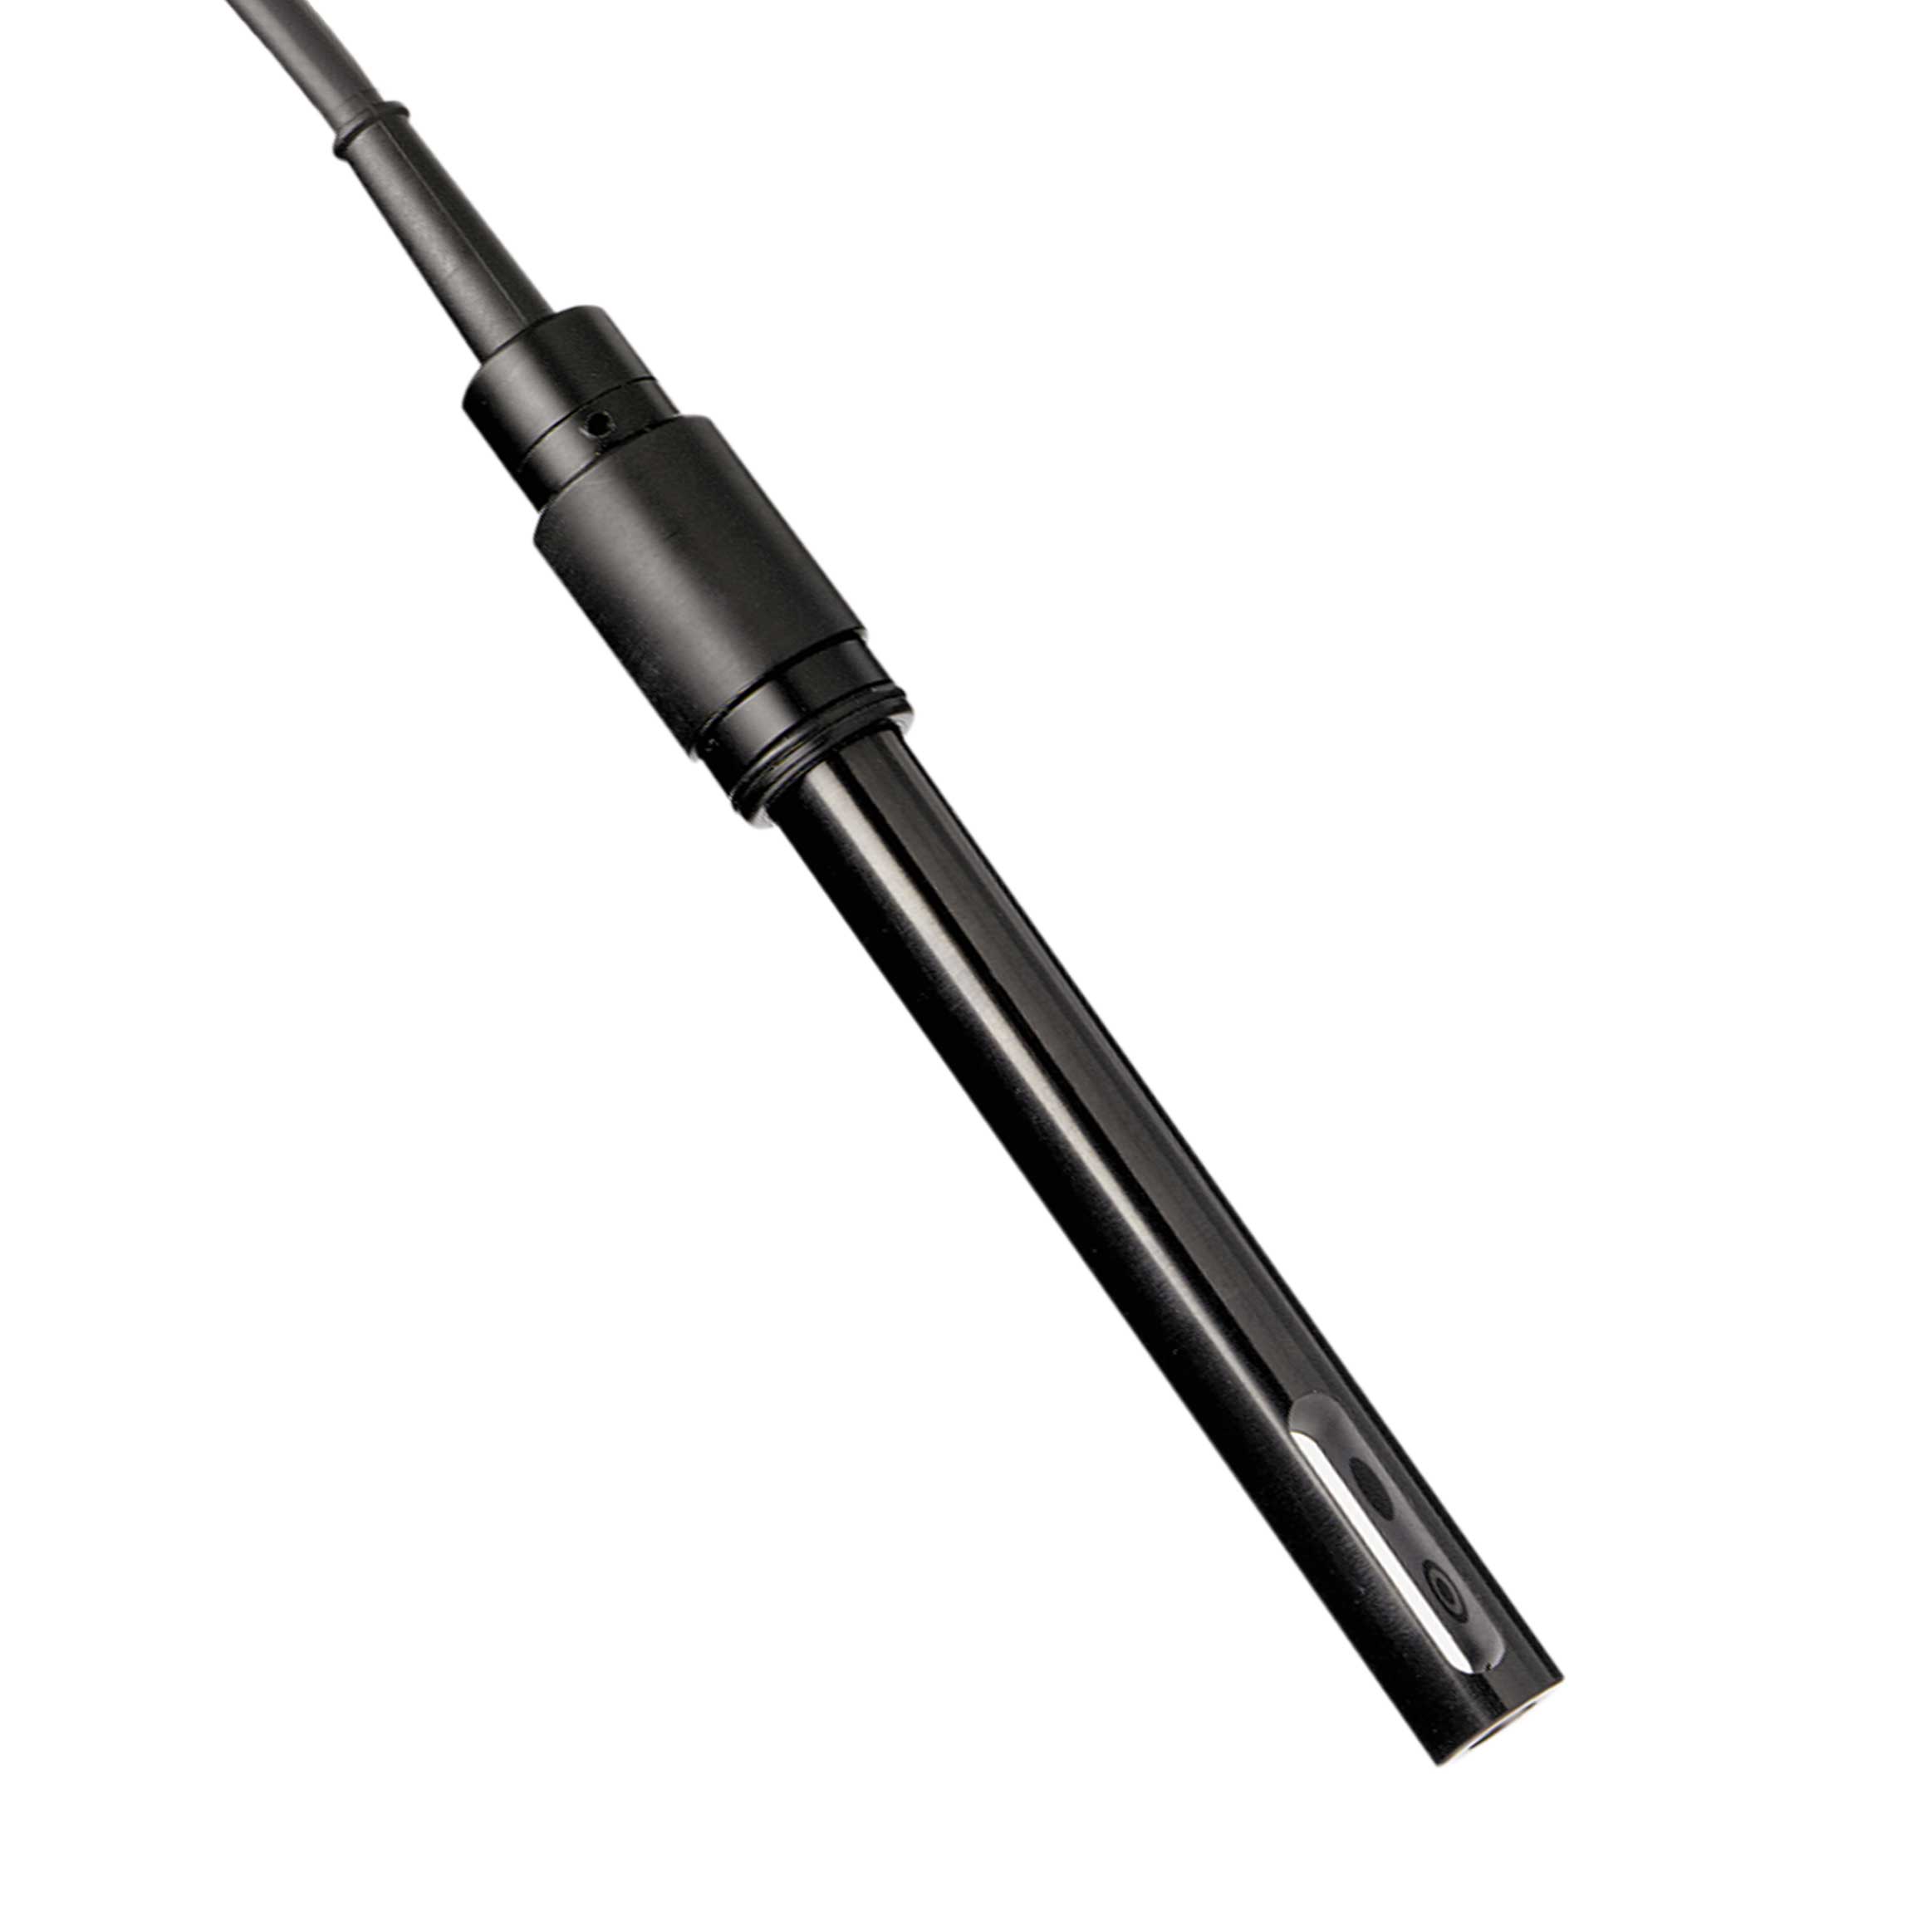 Conductivity cell, K = 0.5 of 4 poles, plastic / graphite NTC30K temperature probe and cable (1 µS-500 mS). For laptop KNICK.Labprocess